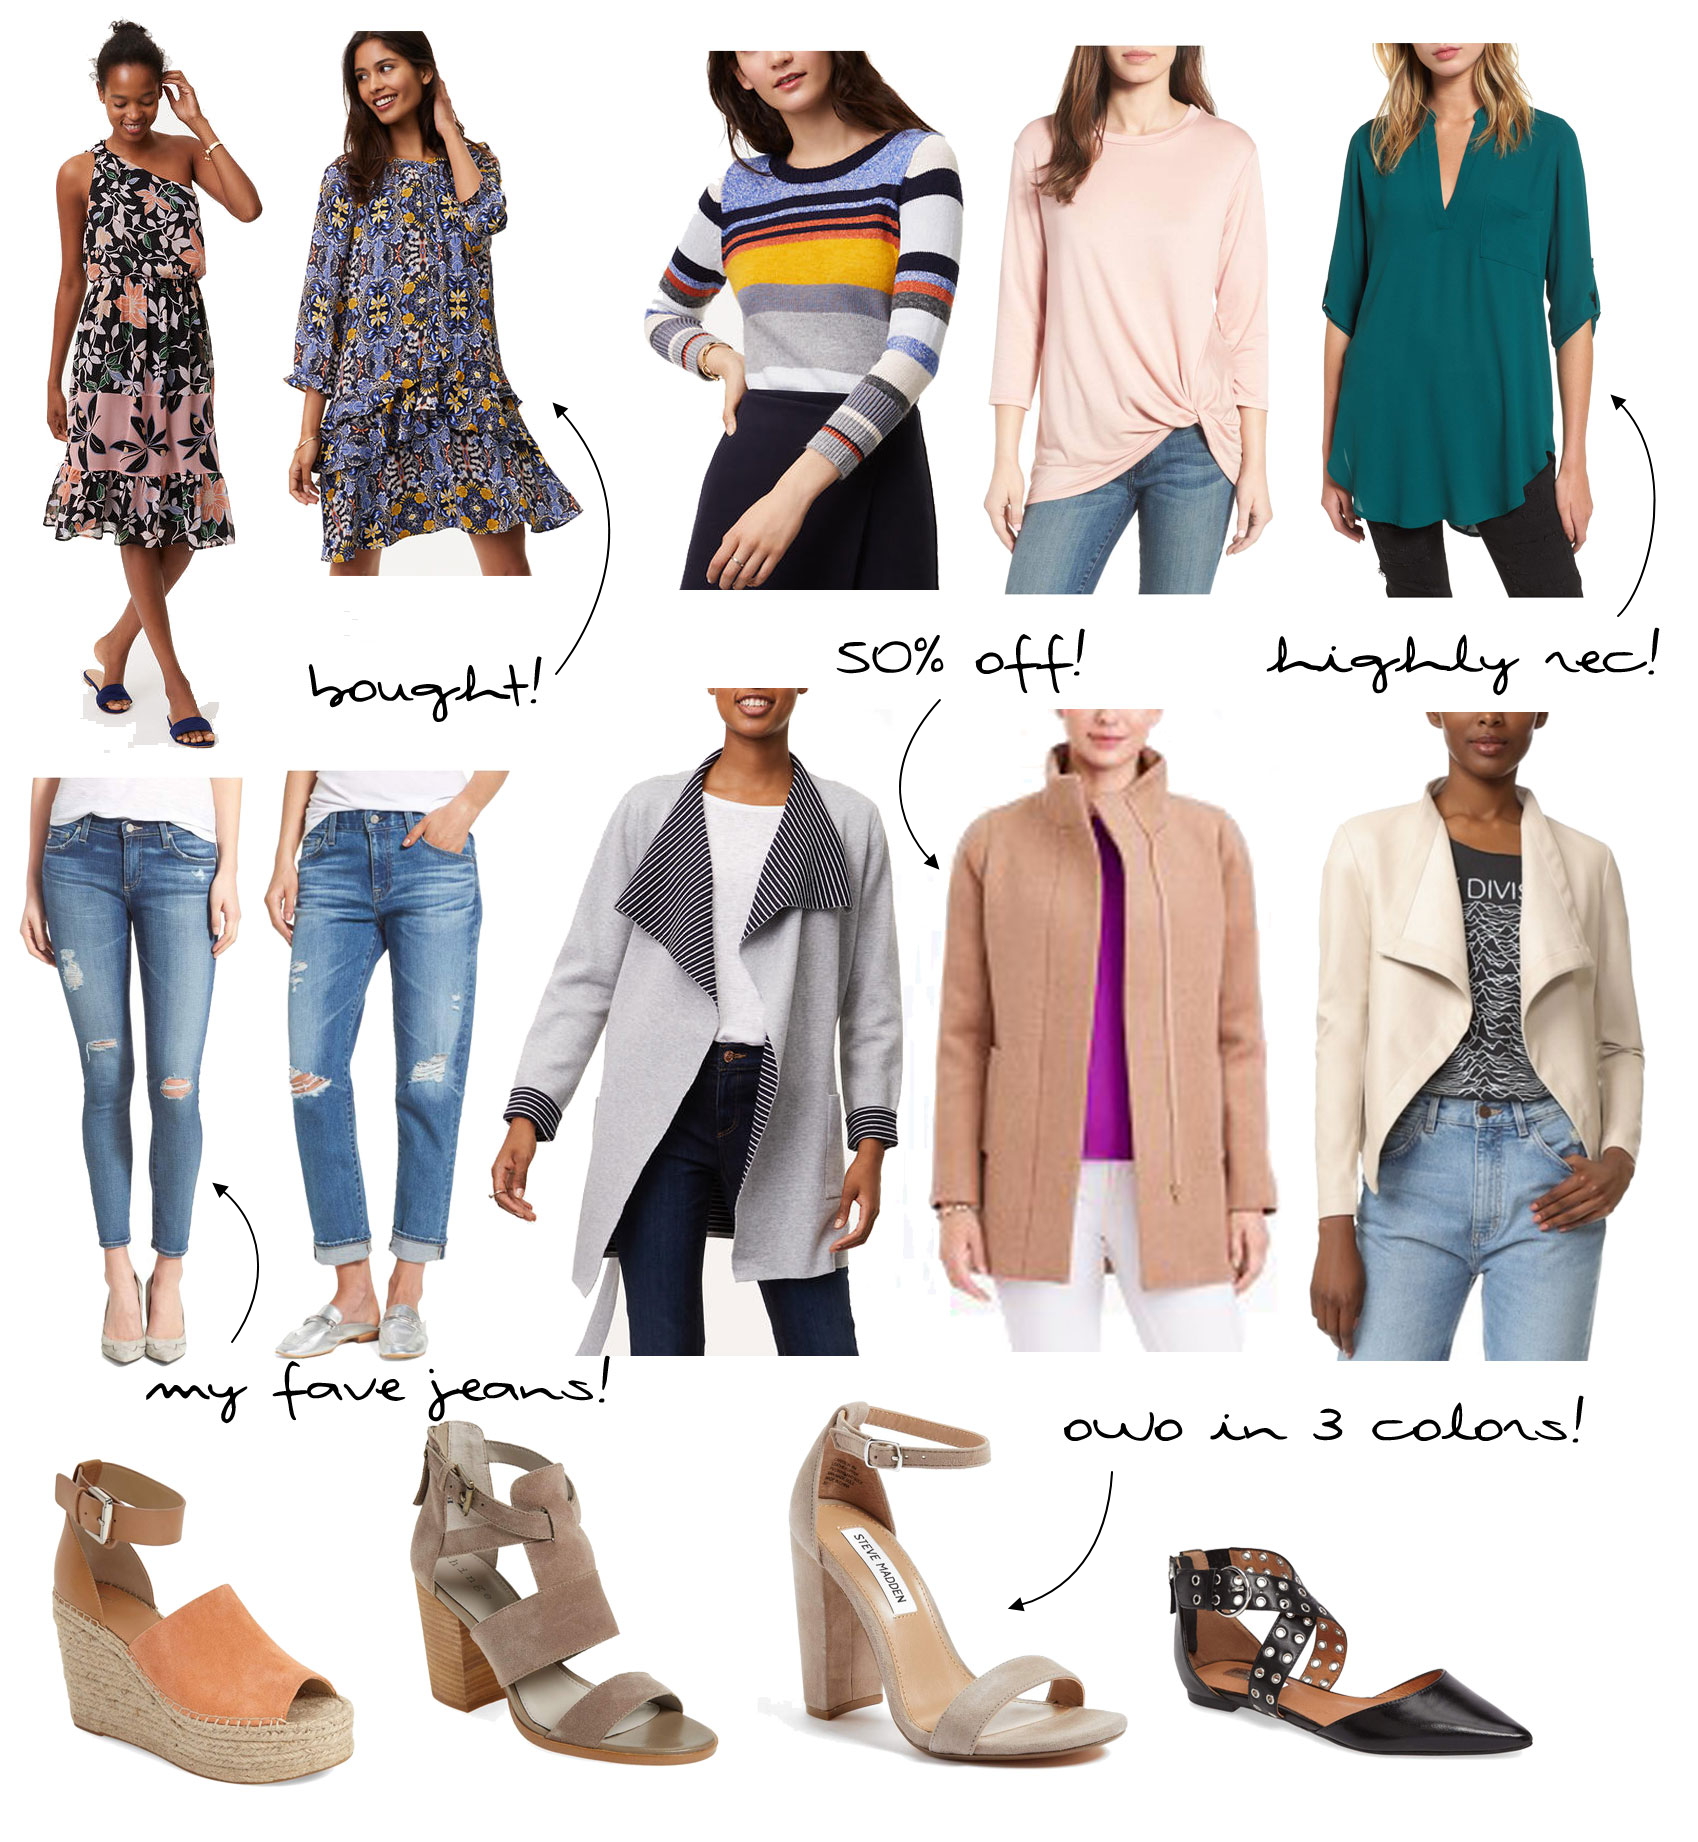 labor day weekend sales - Labor Day Sales by Dallas fashion blogger cute and little